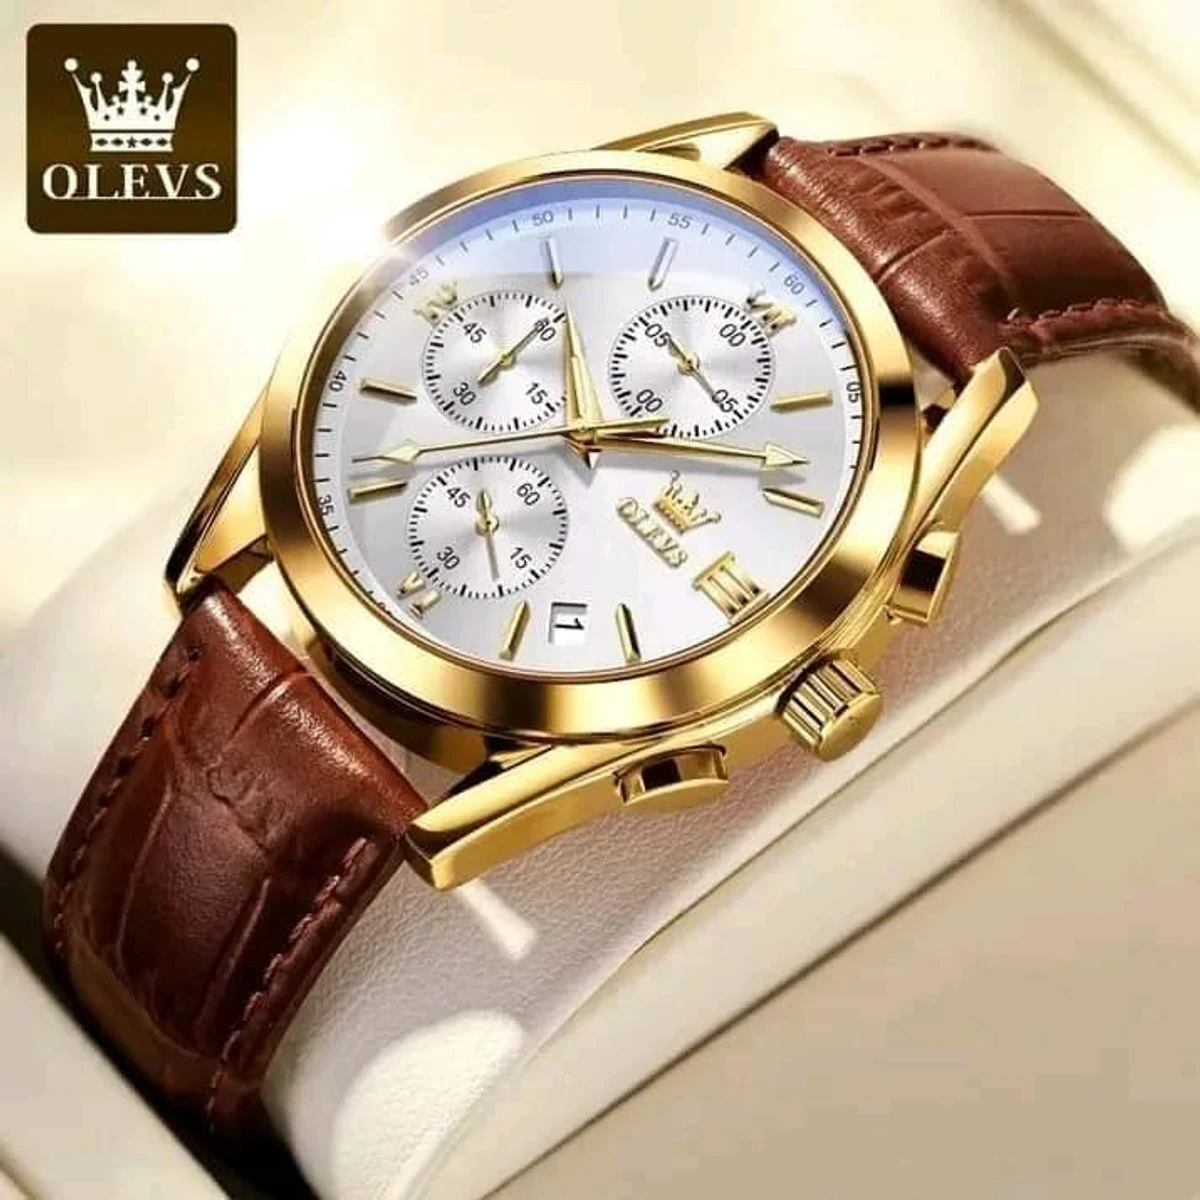 OLEVES CLASSIC WATCH